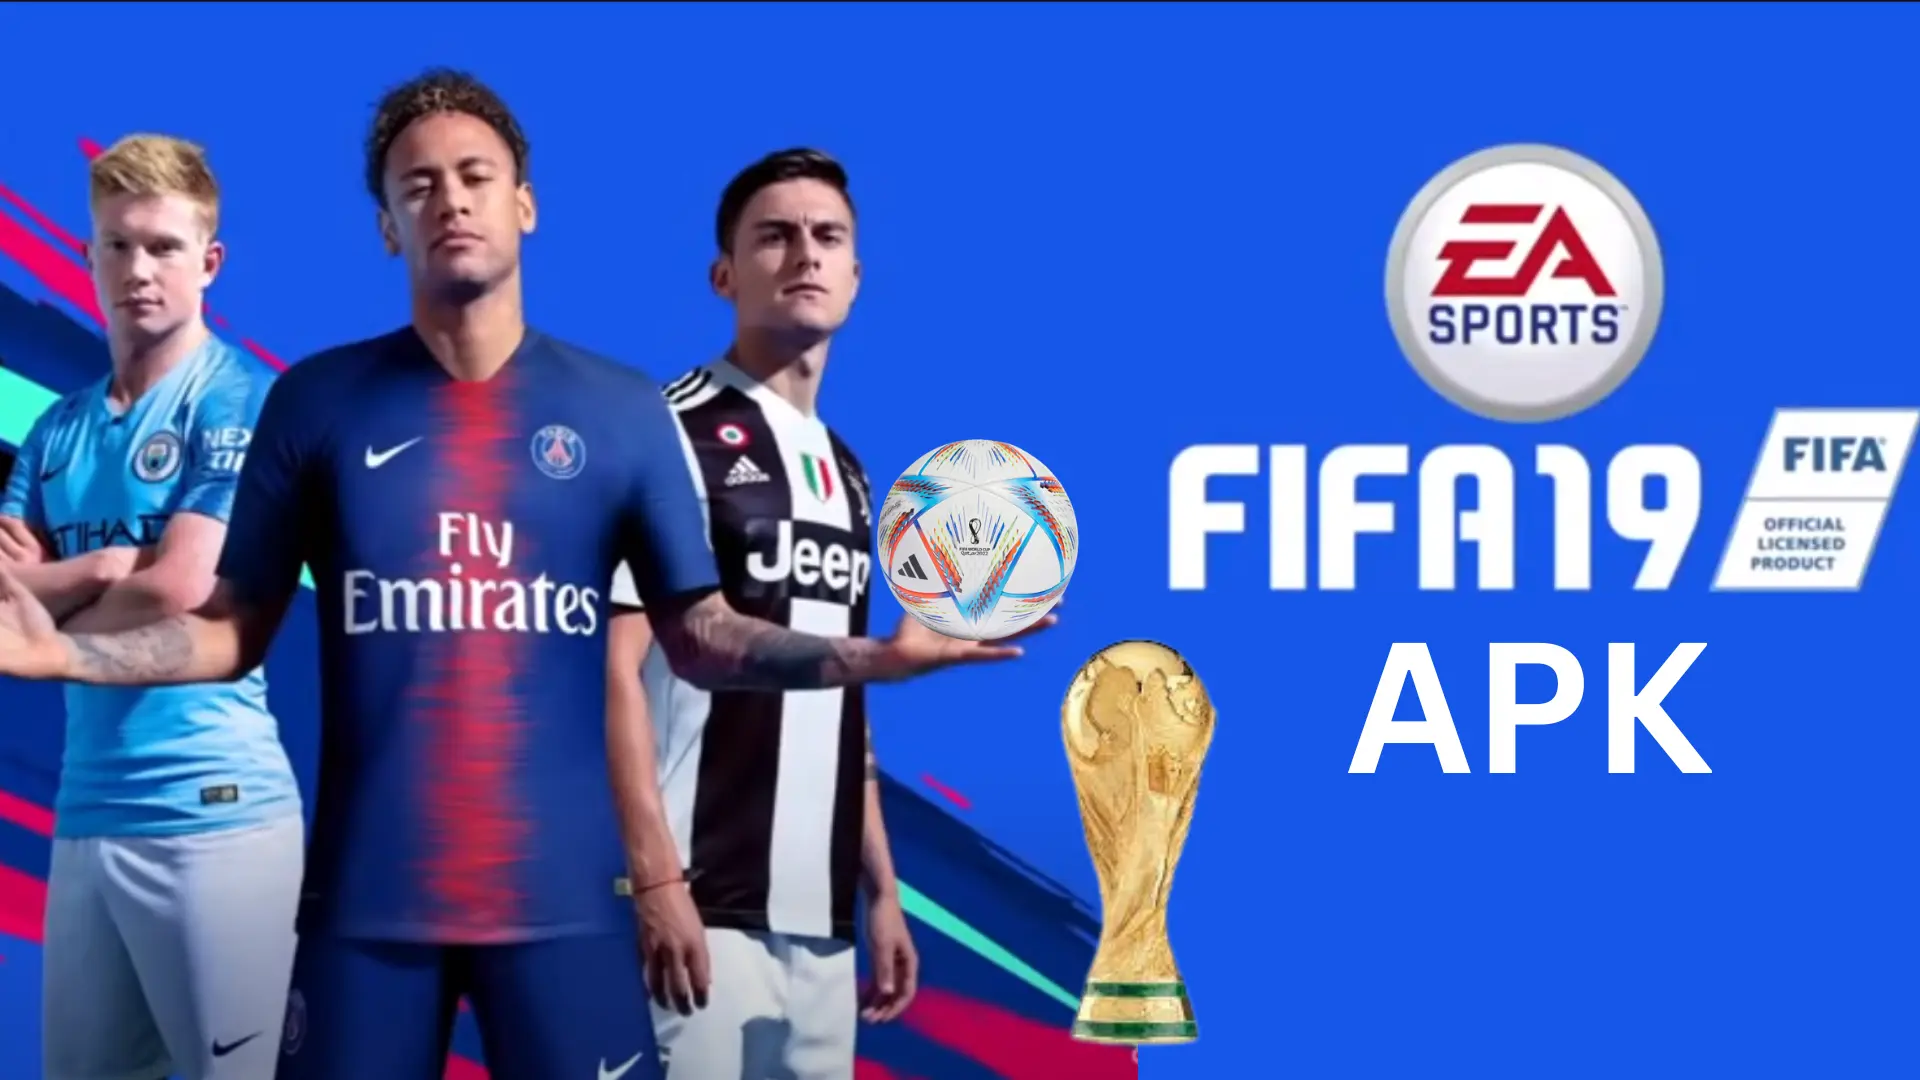 FIFA 23 Mobile is now available on Android: download the MOD APK